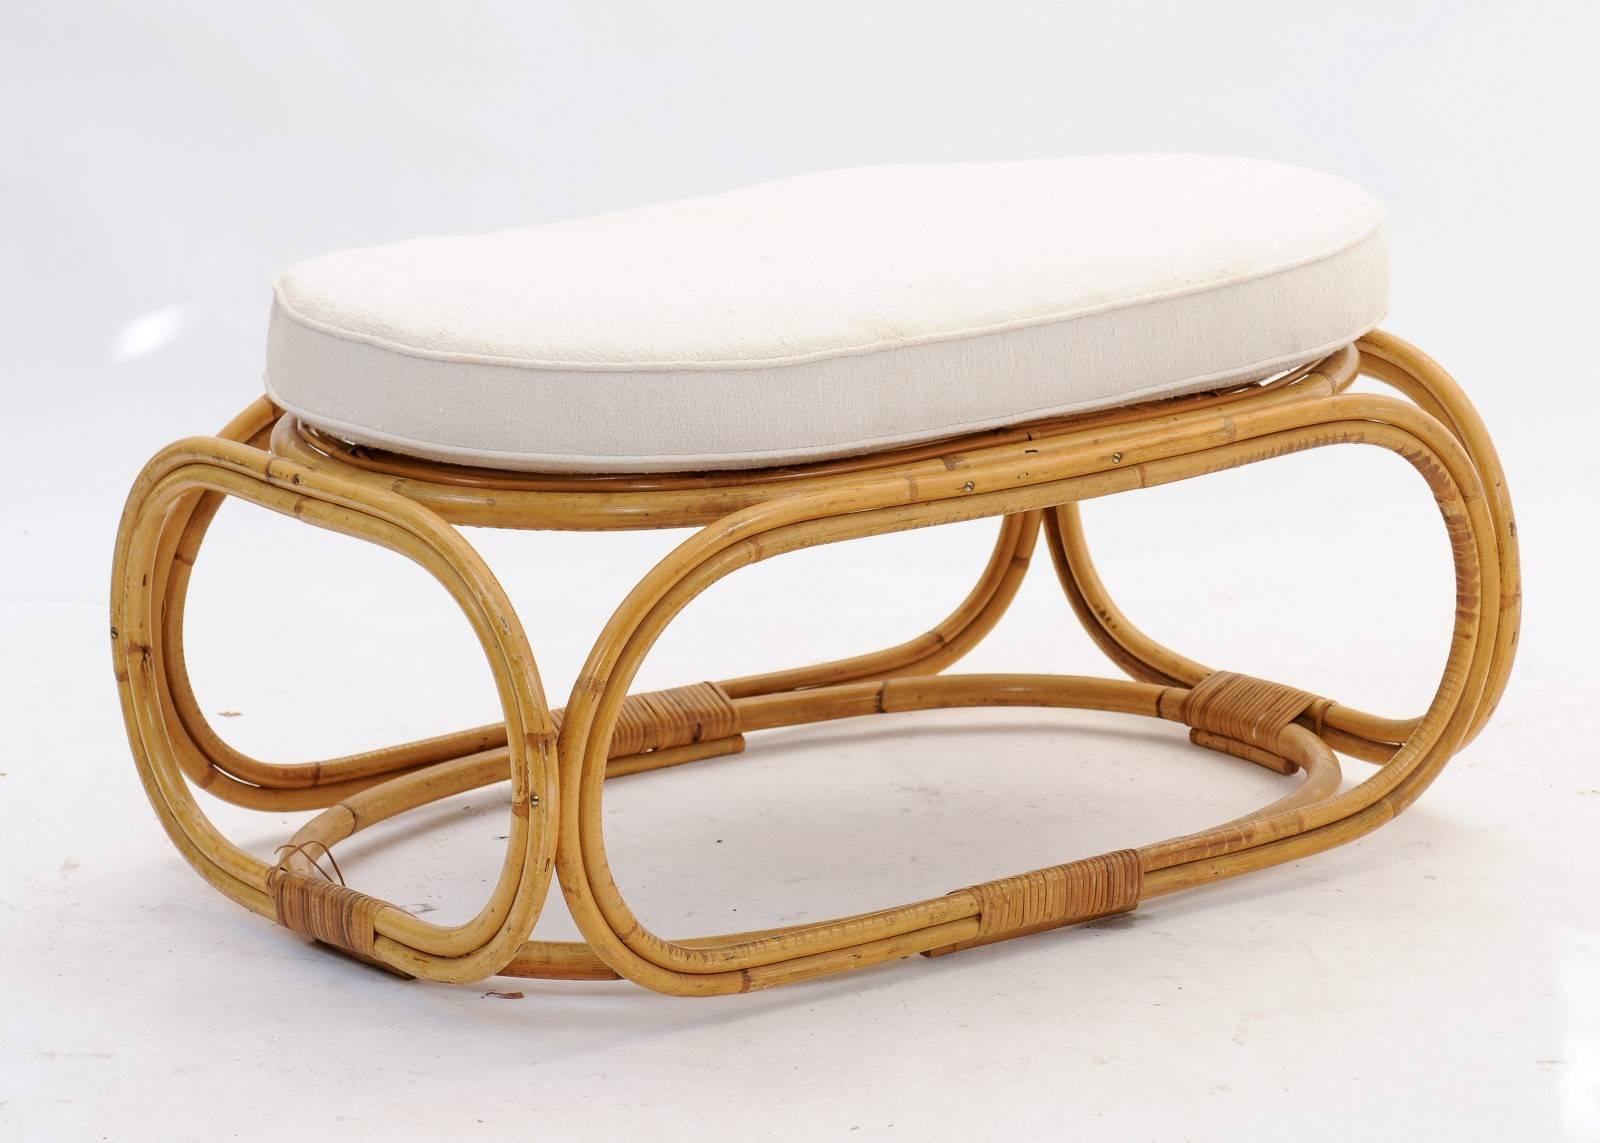 A French Mid-Century Modern rattan ottoman with rounded base and oval upholstered seat. Curvy and playful, this retro 1950s ottoman makes its mark by the pool or on the veranda. We love the rounded base and comfy seat and how the whole piece exudes